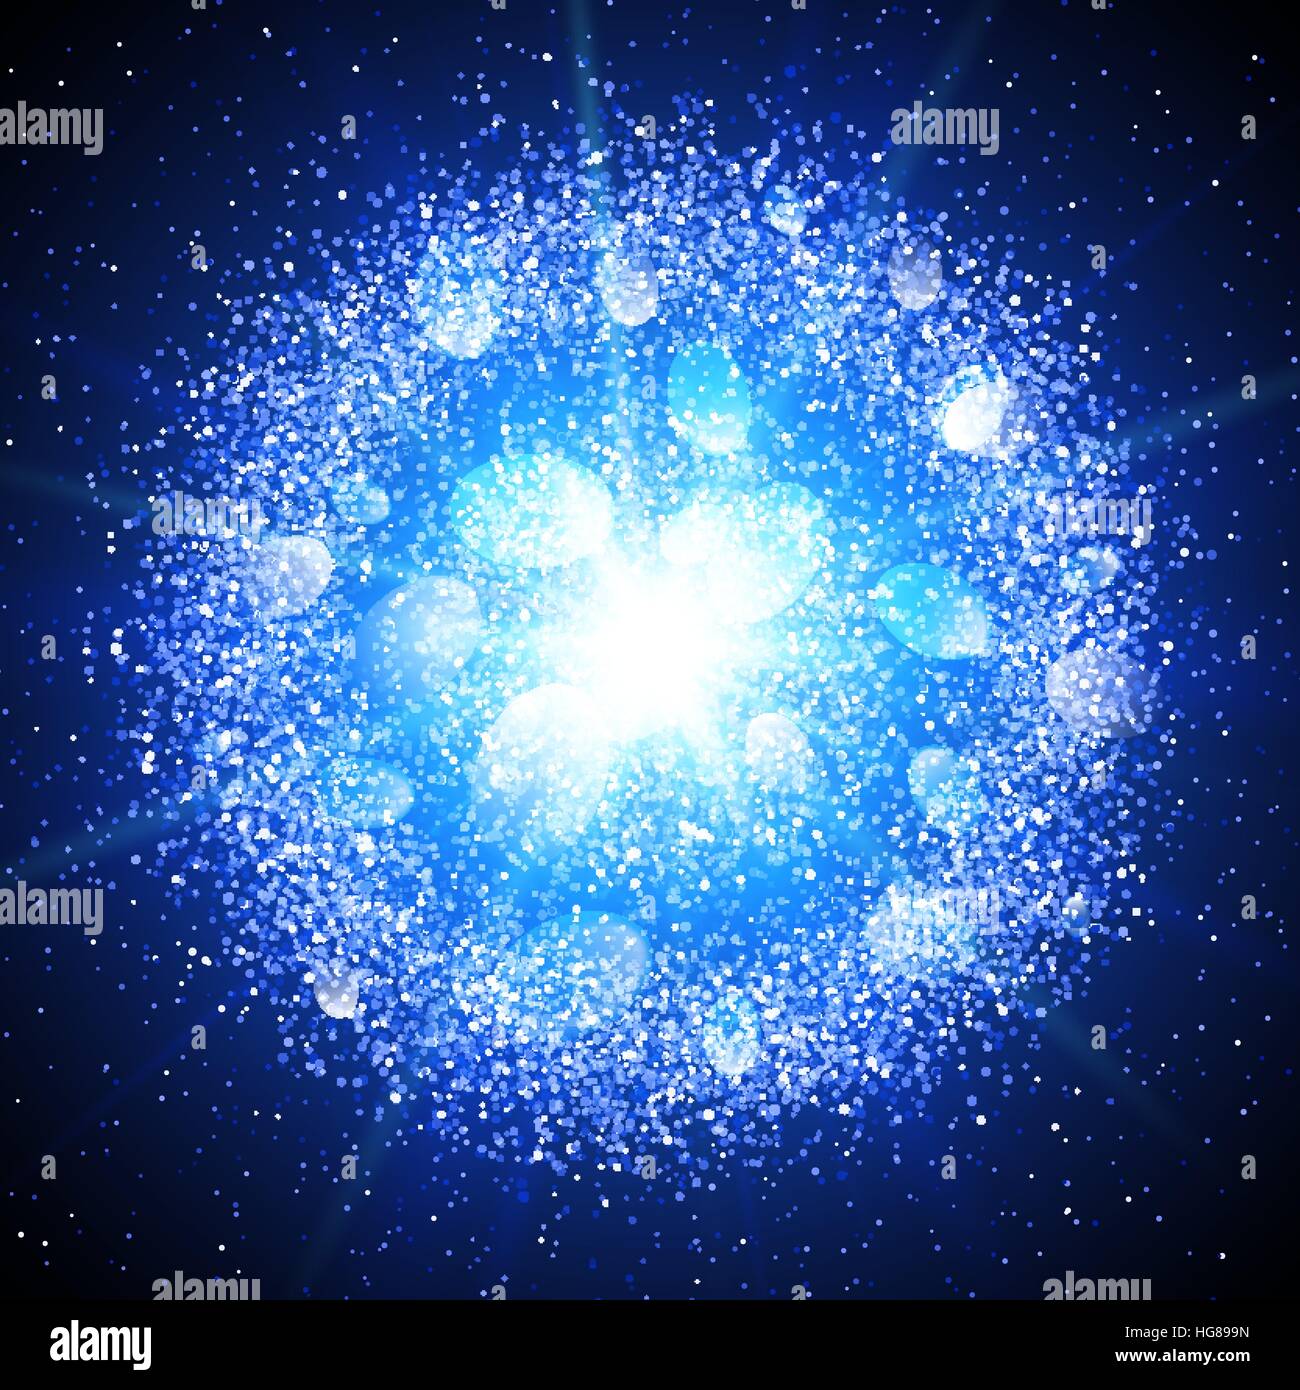 Abstract blue explosion with glittering elements. Burst of glowing star. Dust firework light effect. Sparkles splash powder background. Vector illustration. Stock Vector